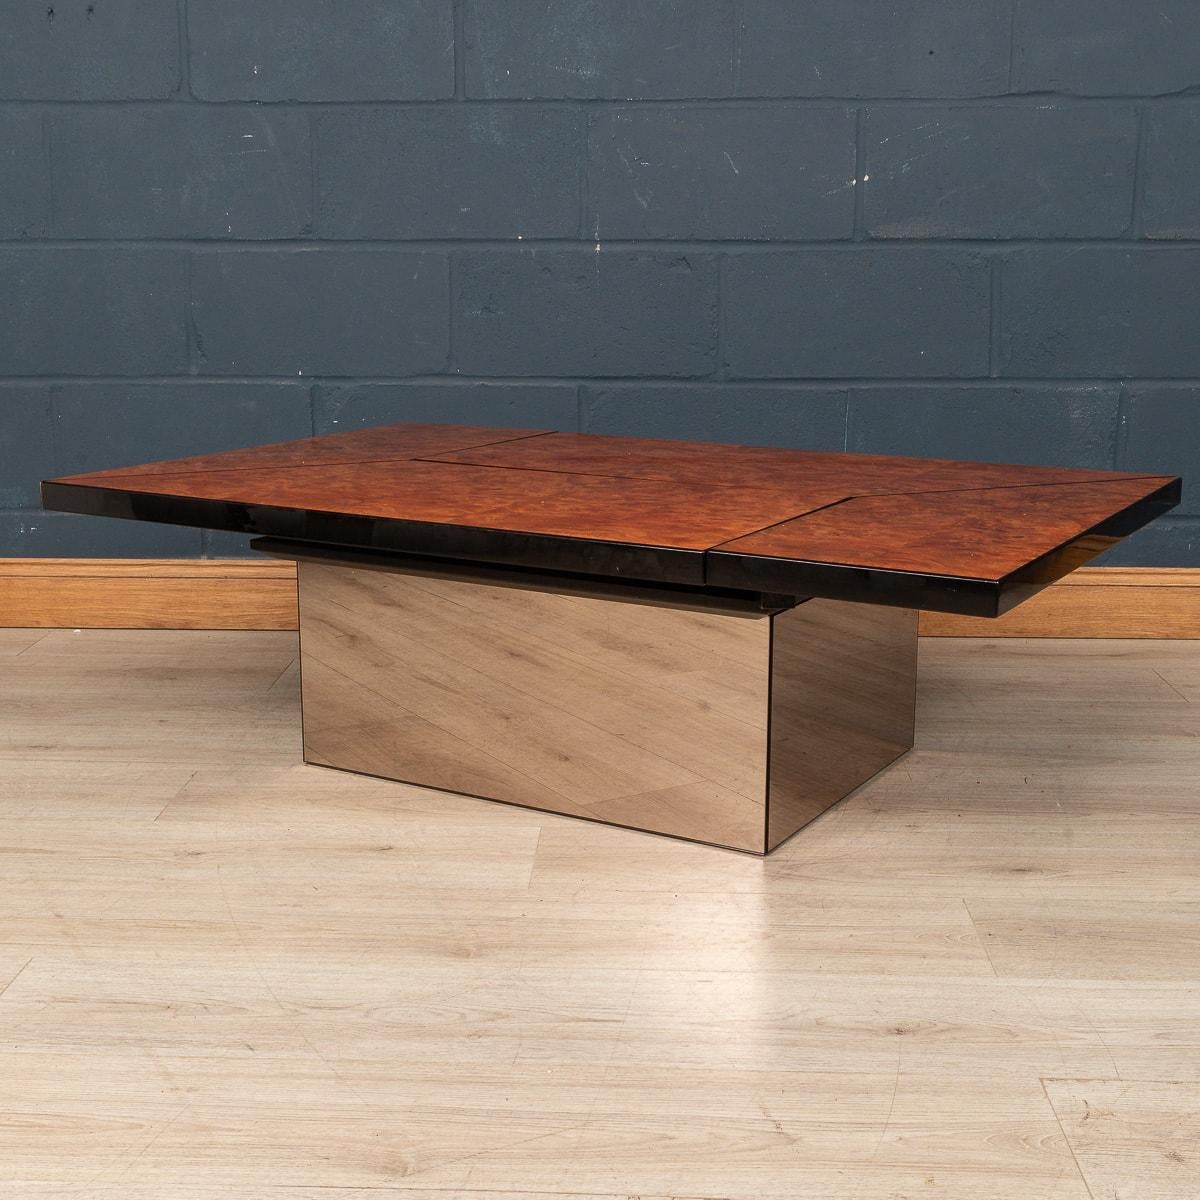 A stylish 1970s mid century coffee table and dry cocktail bar designed by Paul Michel for the luxury interiors brand Roche Bobois. An exotic wood veneer finishes the table top and pops out wonderfully against the mirrored glass base. The table opens